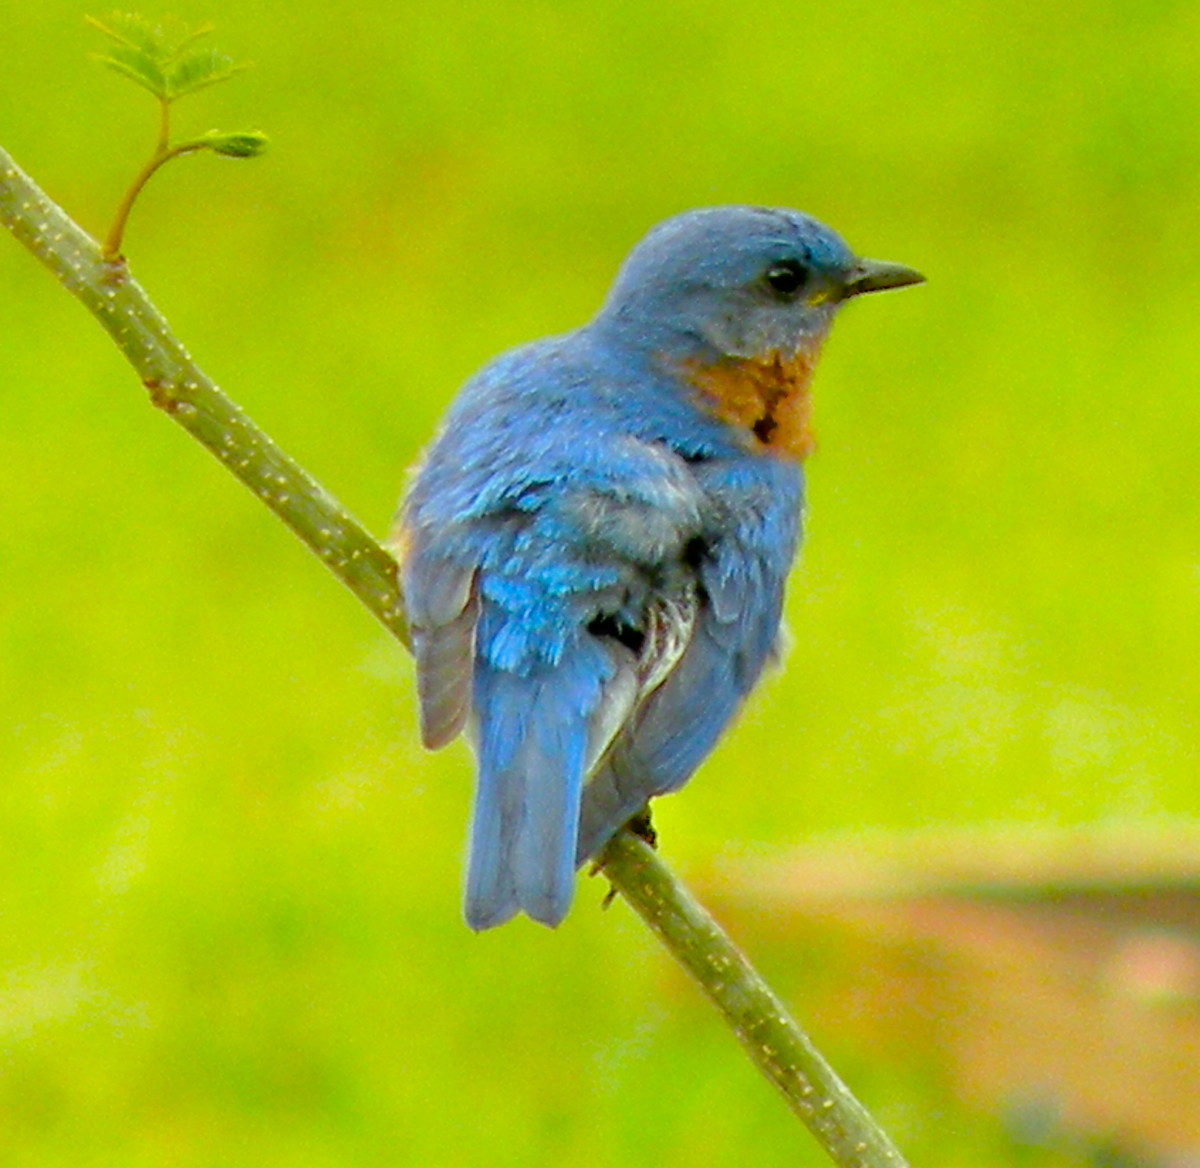 There's no place like home to watch birds. Here's a backyard bluebird.